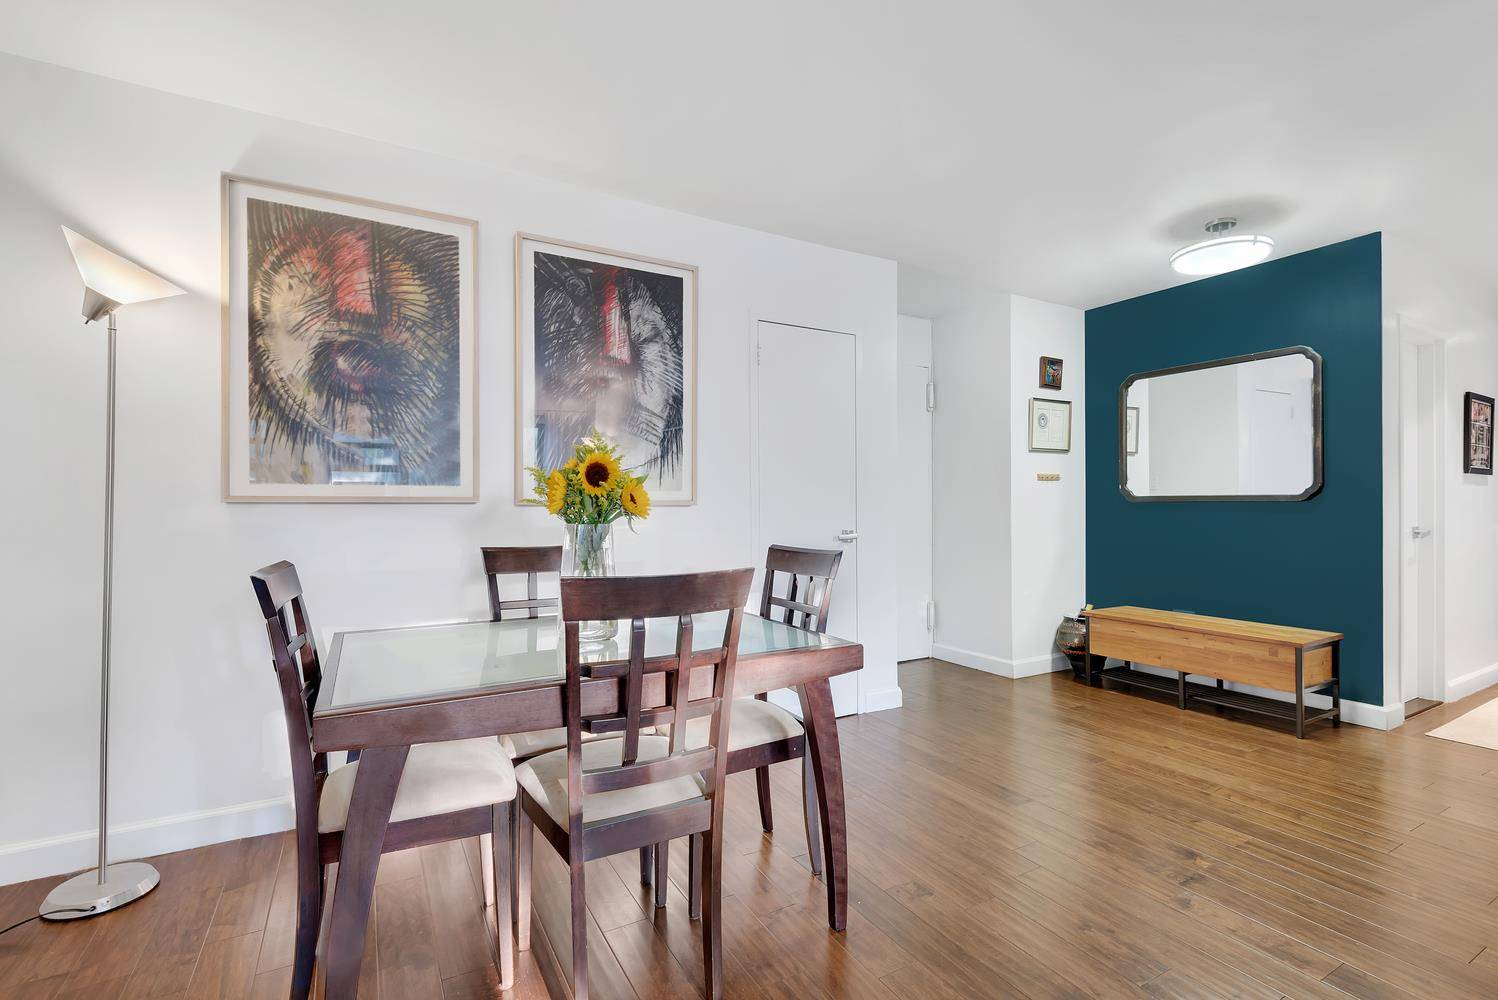 This beautifully renovated 2 bedroom, 1 bath apt with serene tree line views is a must see oasis in Brooklyn.